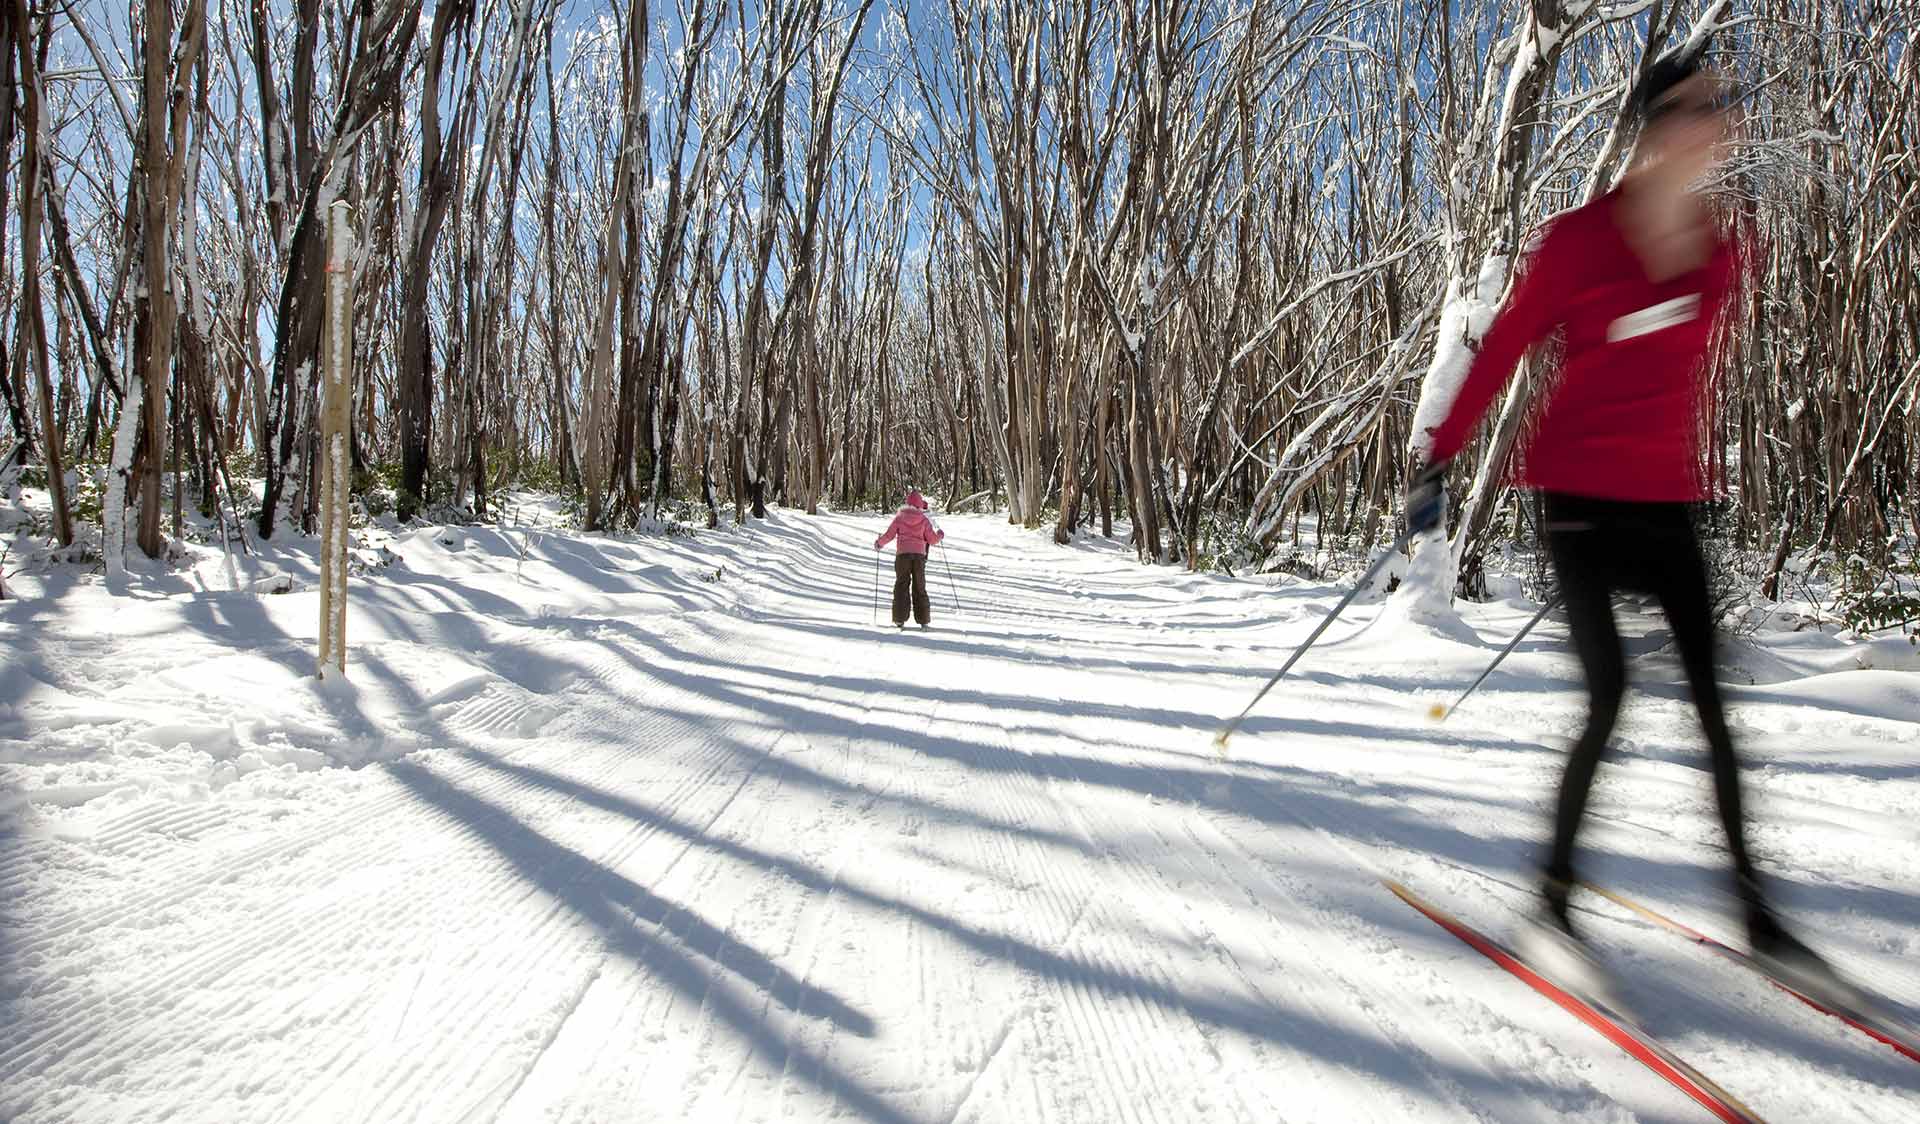 An experienced cross-country skier skis past a small child learning to ski on a maintained path.